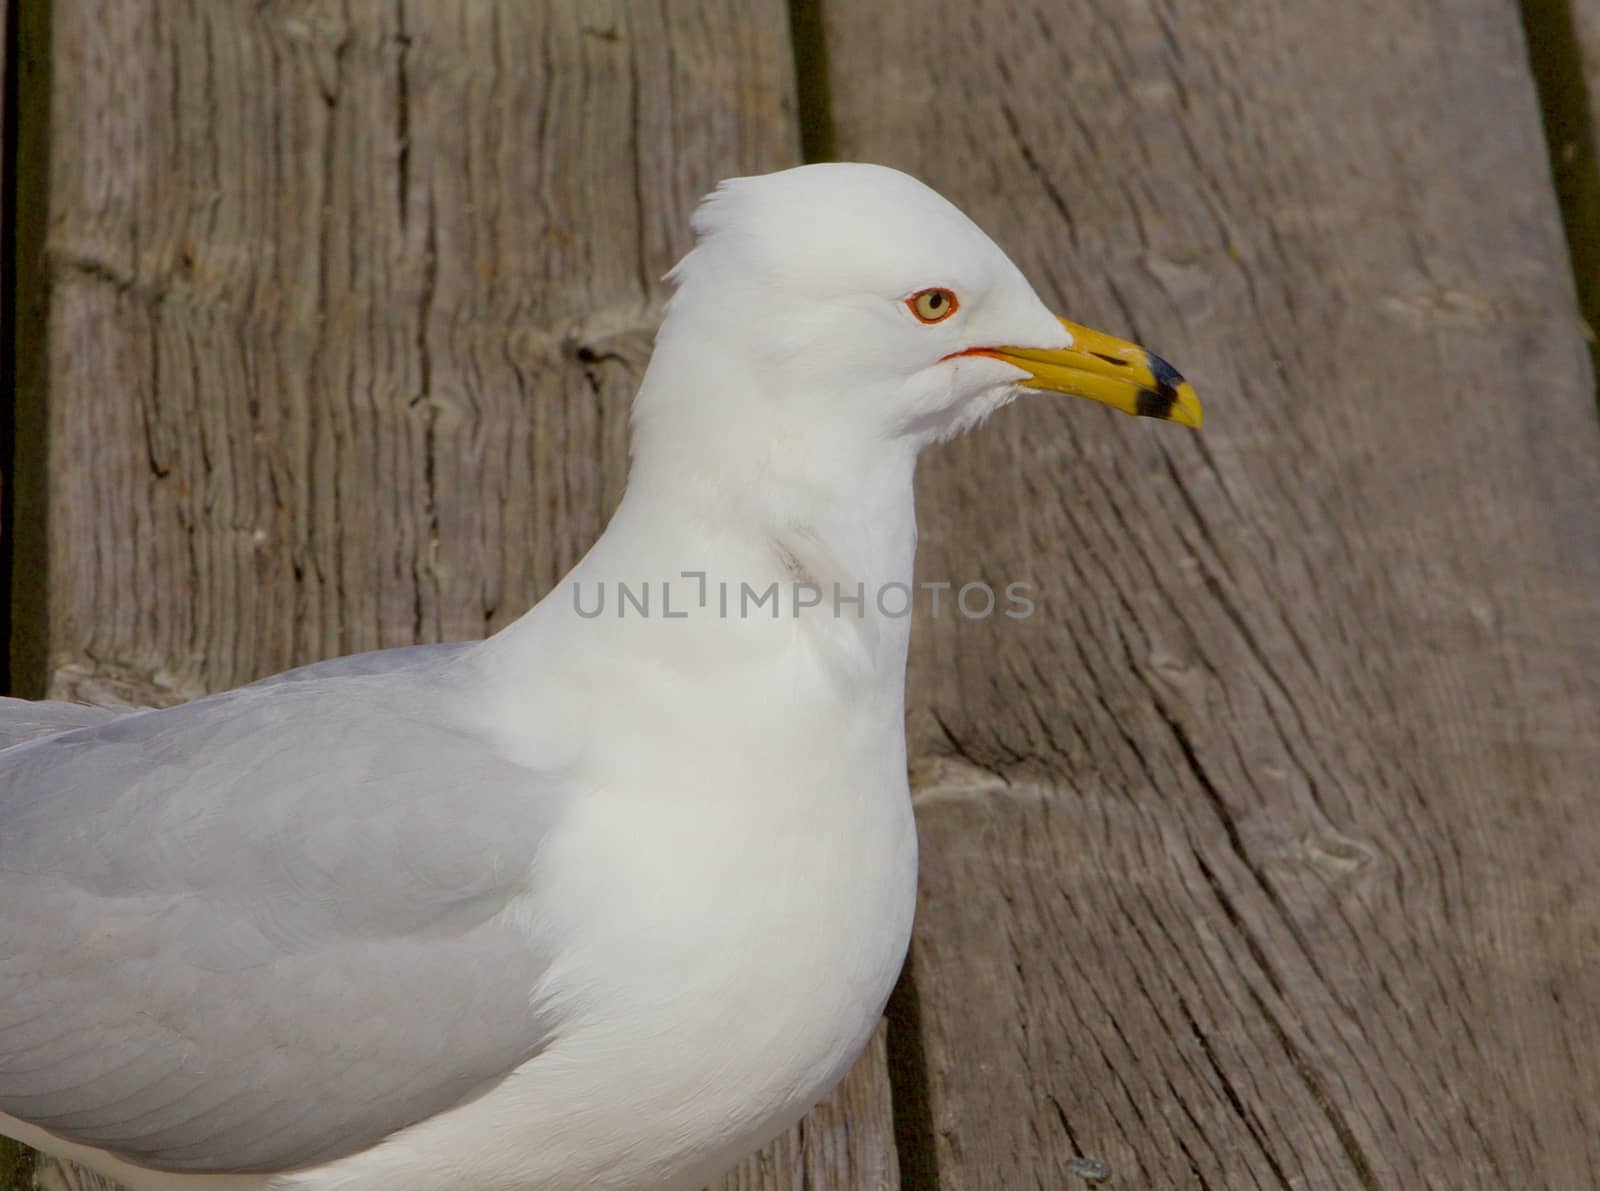 The ring-billed gull's portrait